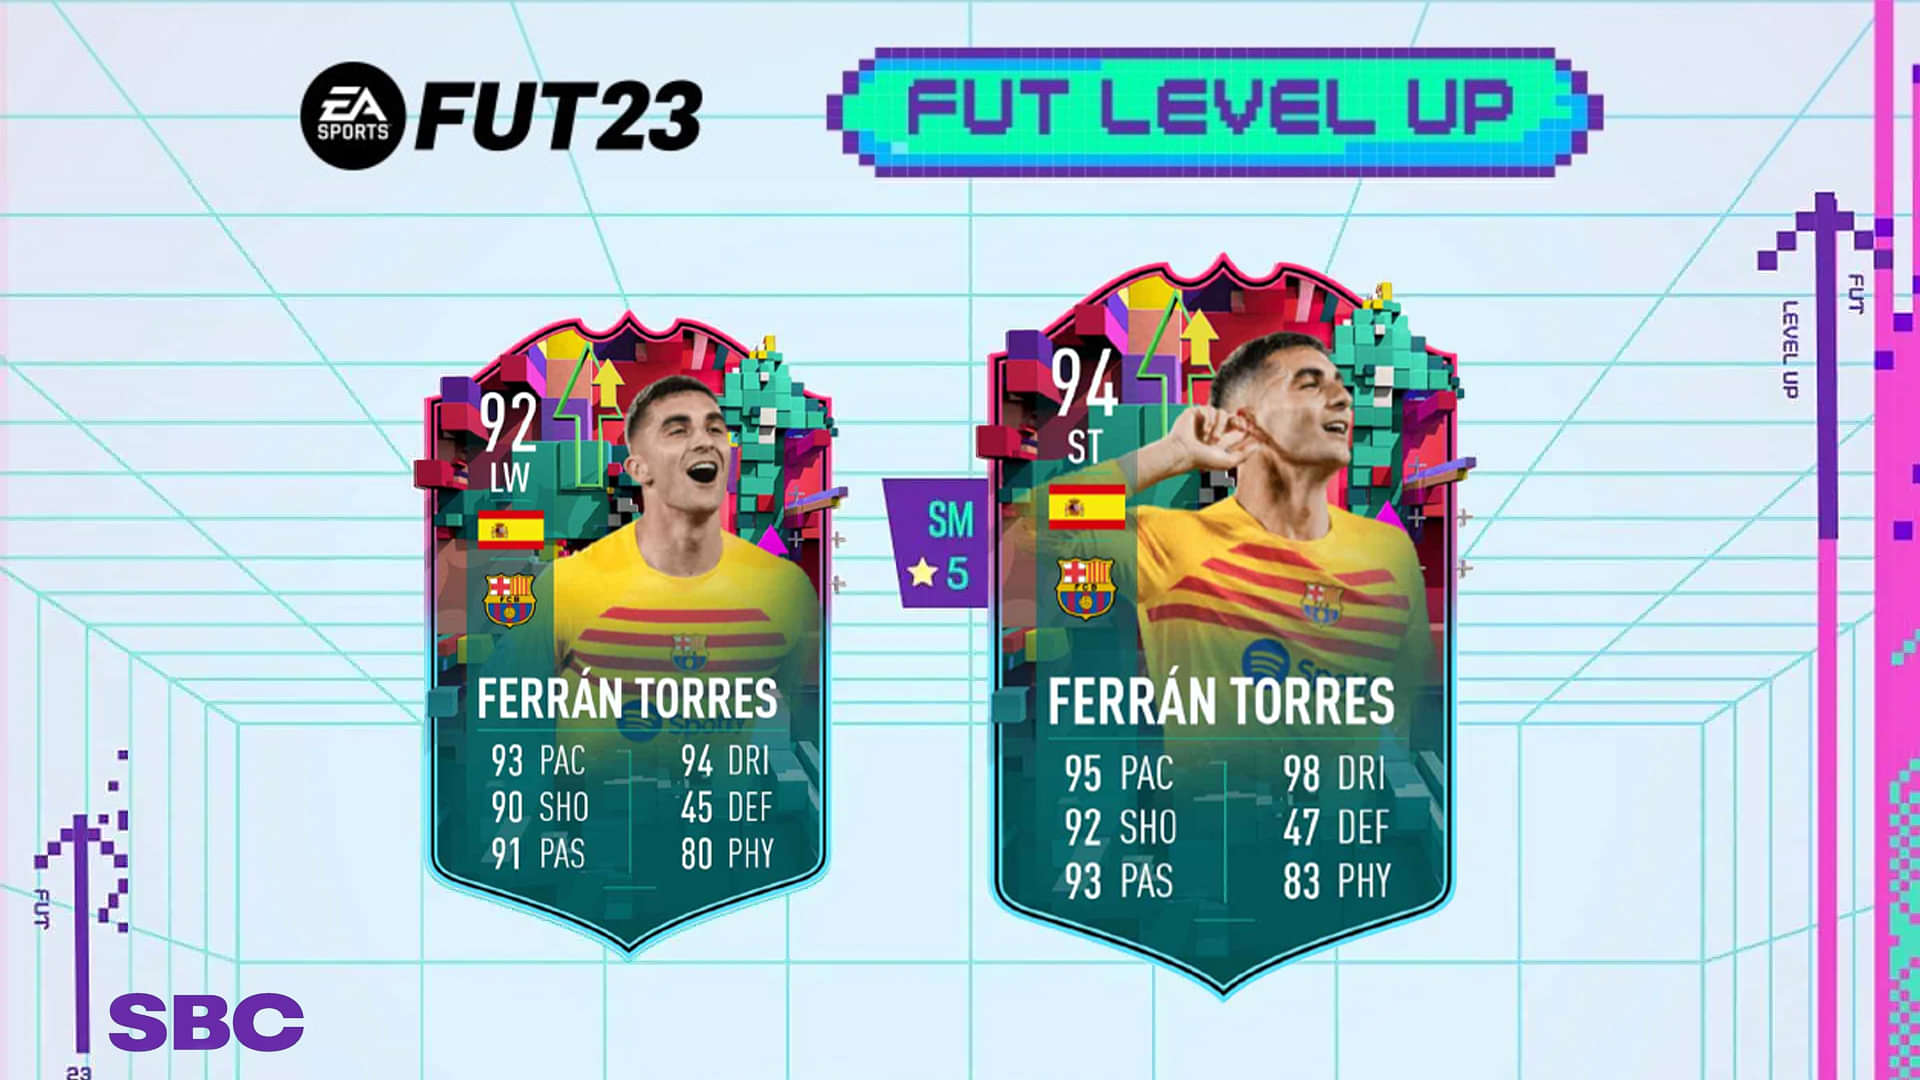 FIFA 23: New FUT promo could be coming this weekend